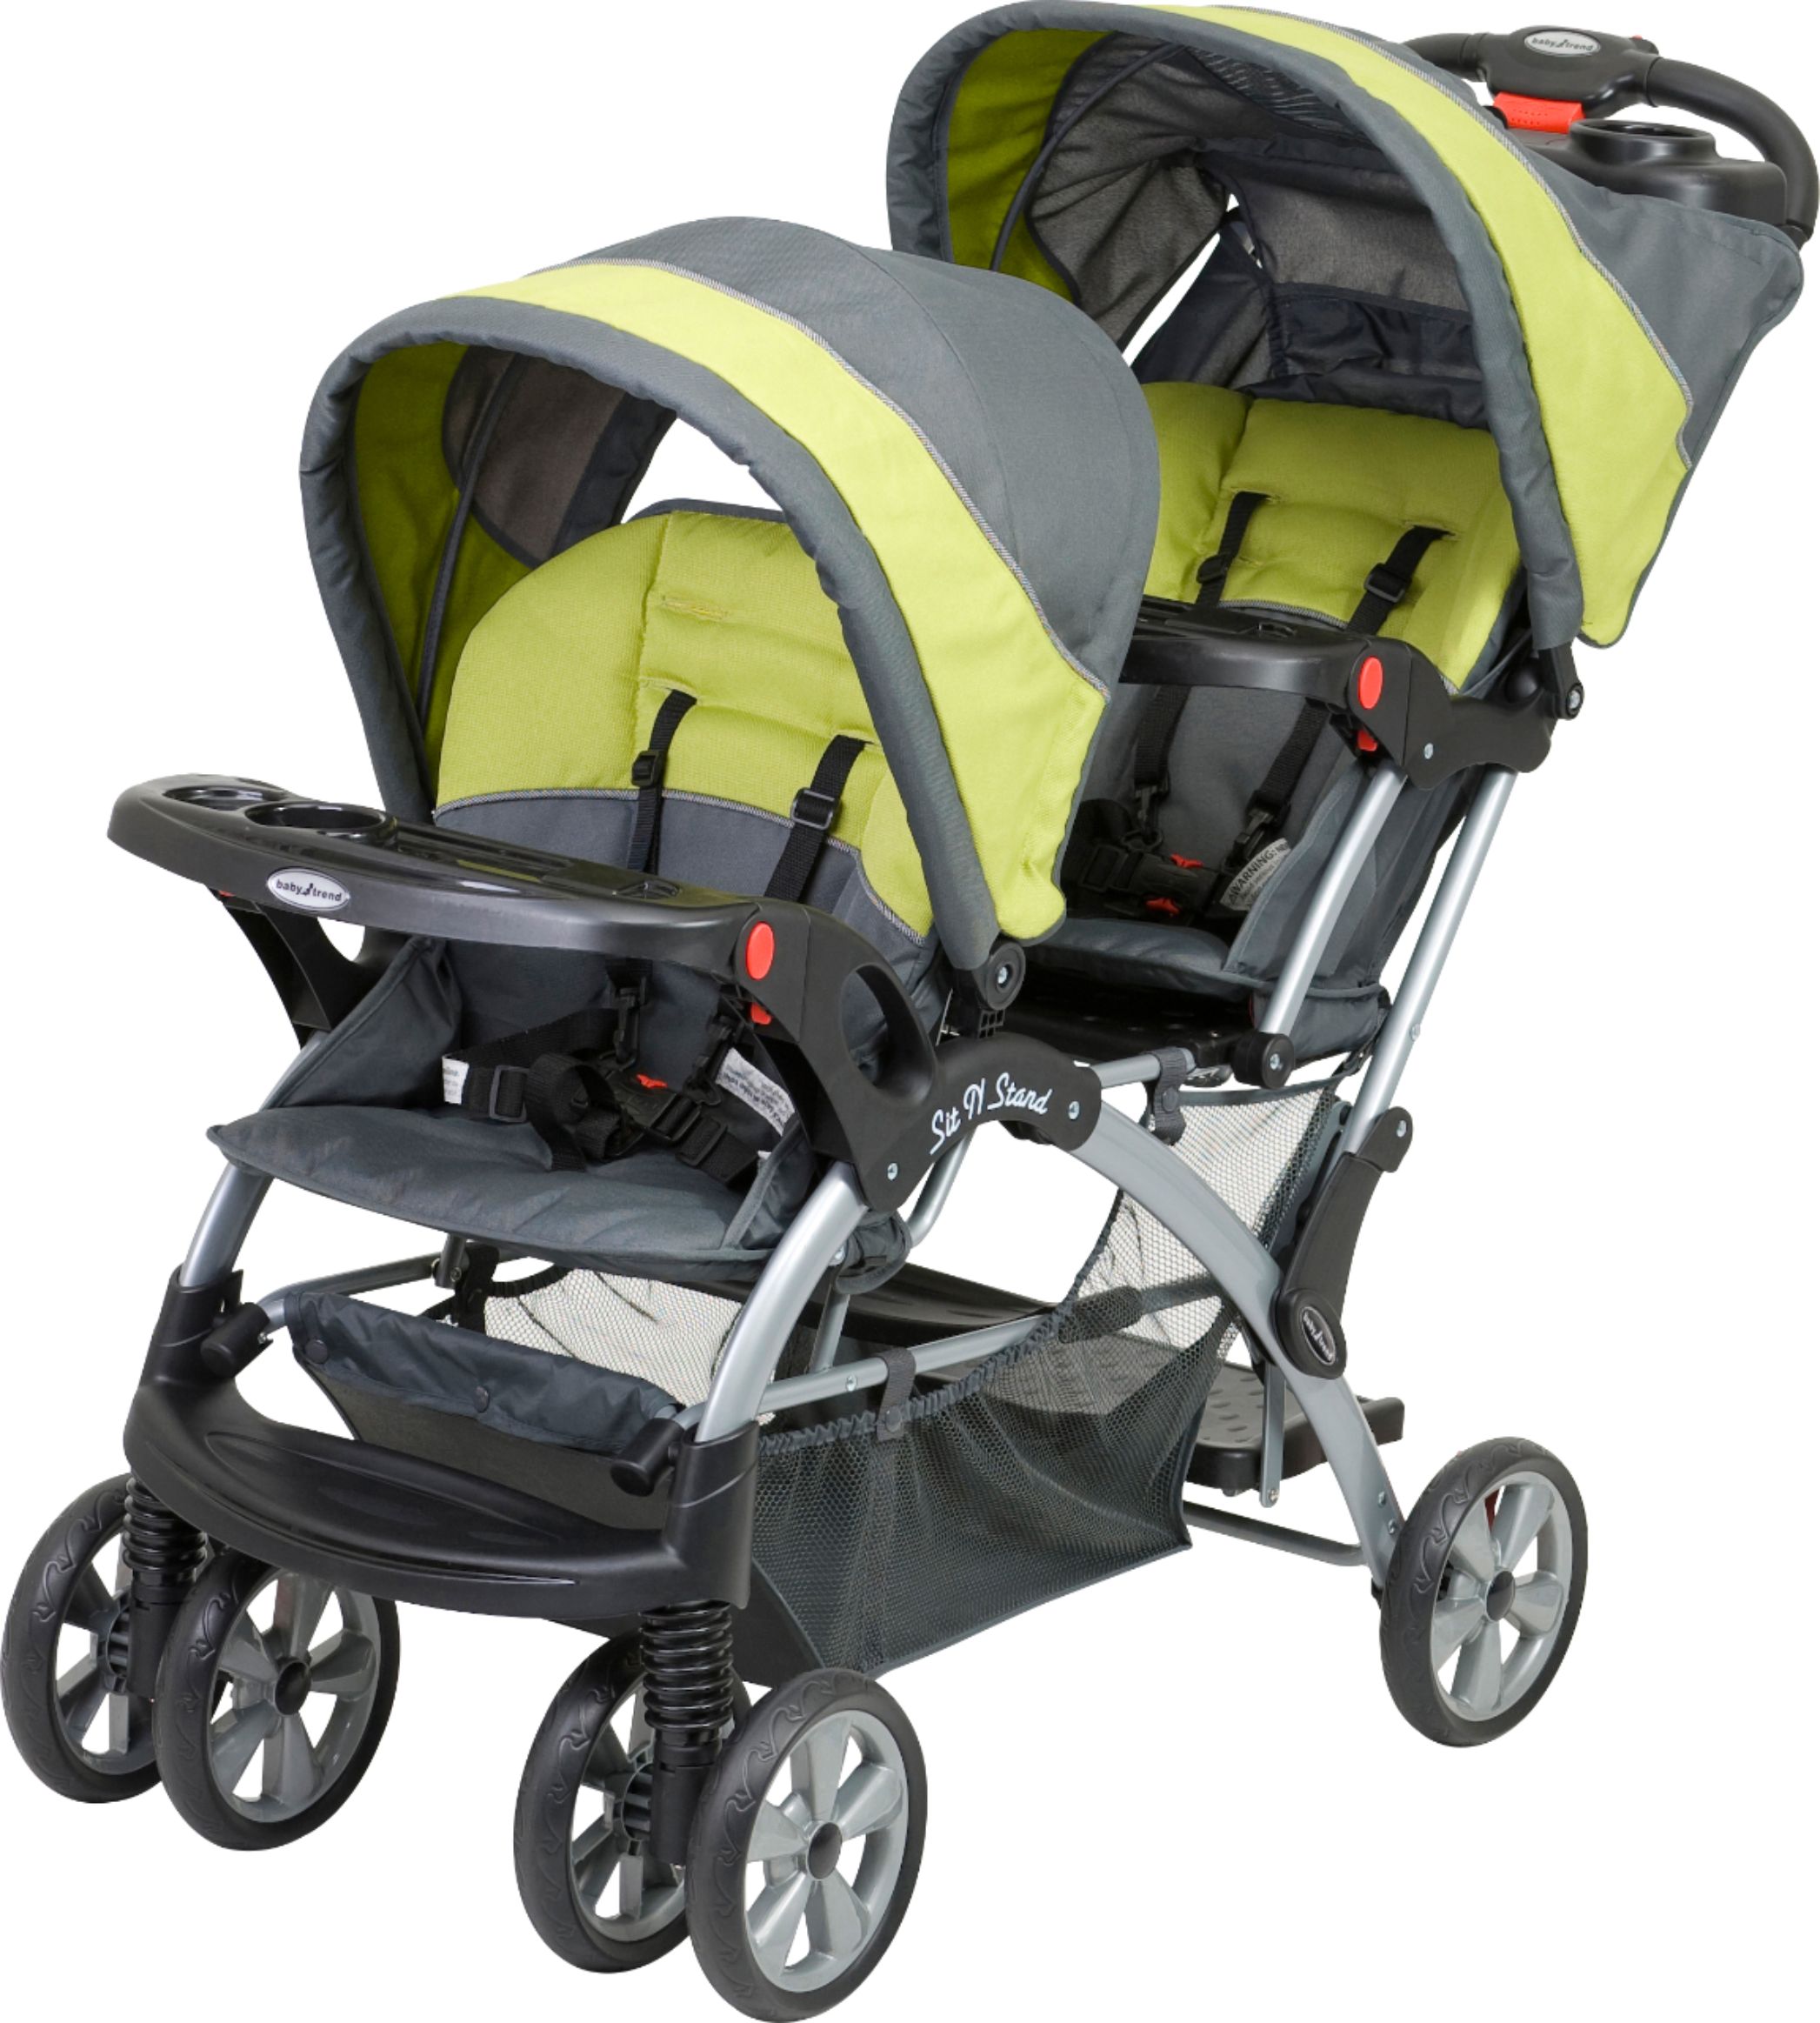 baby trend double stroller weight limit